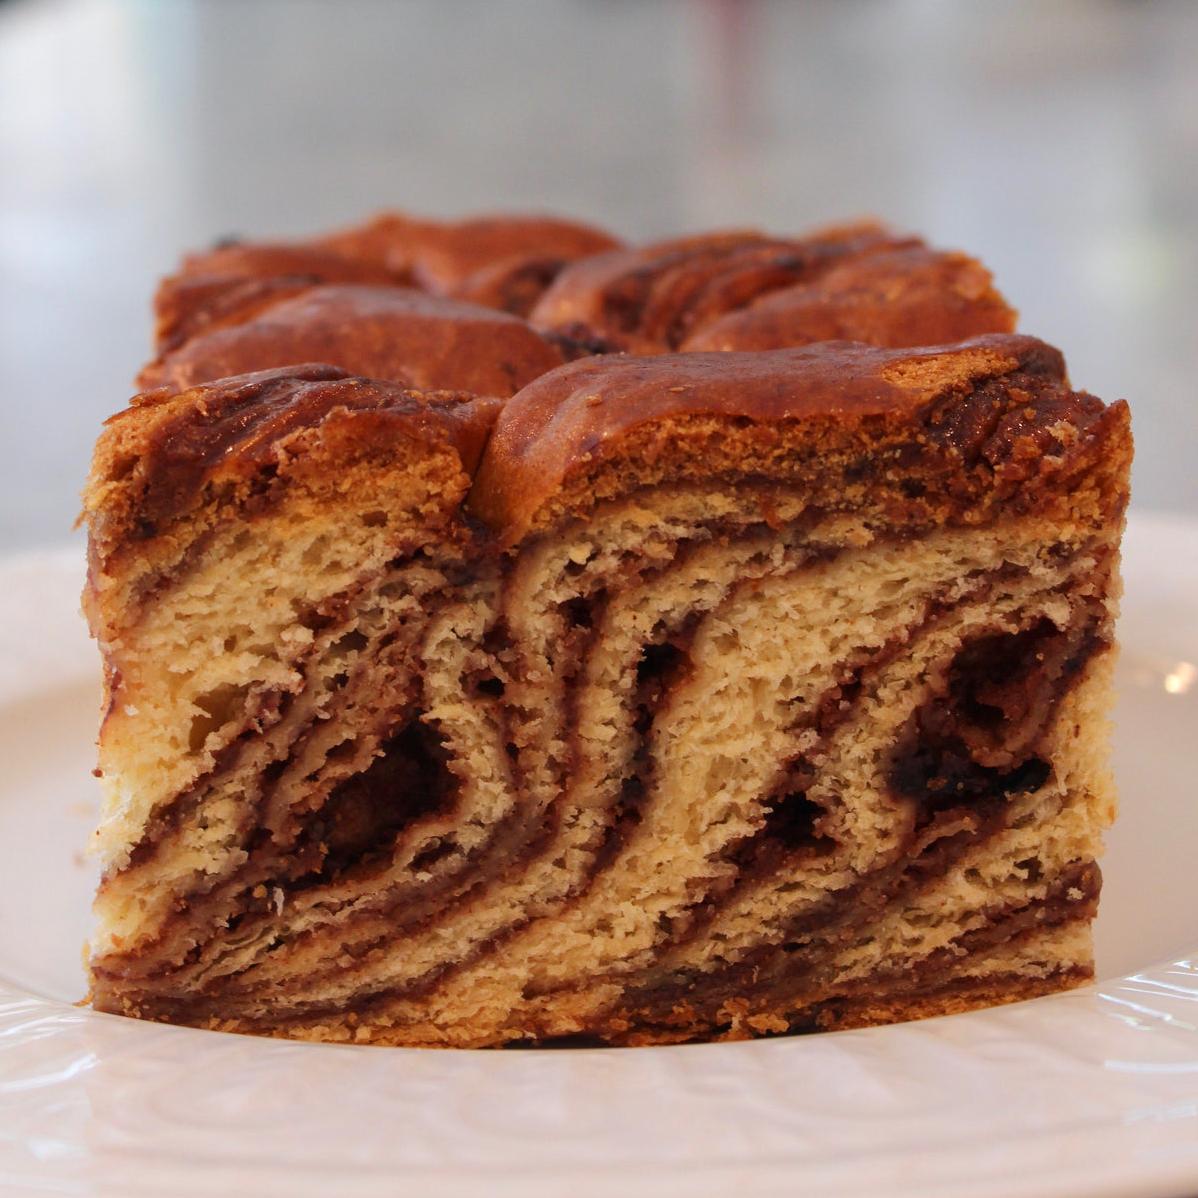  This cake is your perfect partner for your cup of coffee!